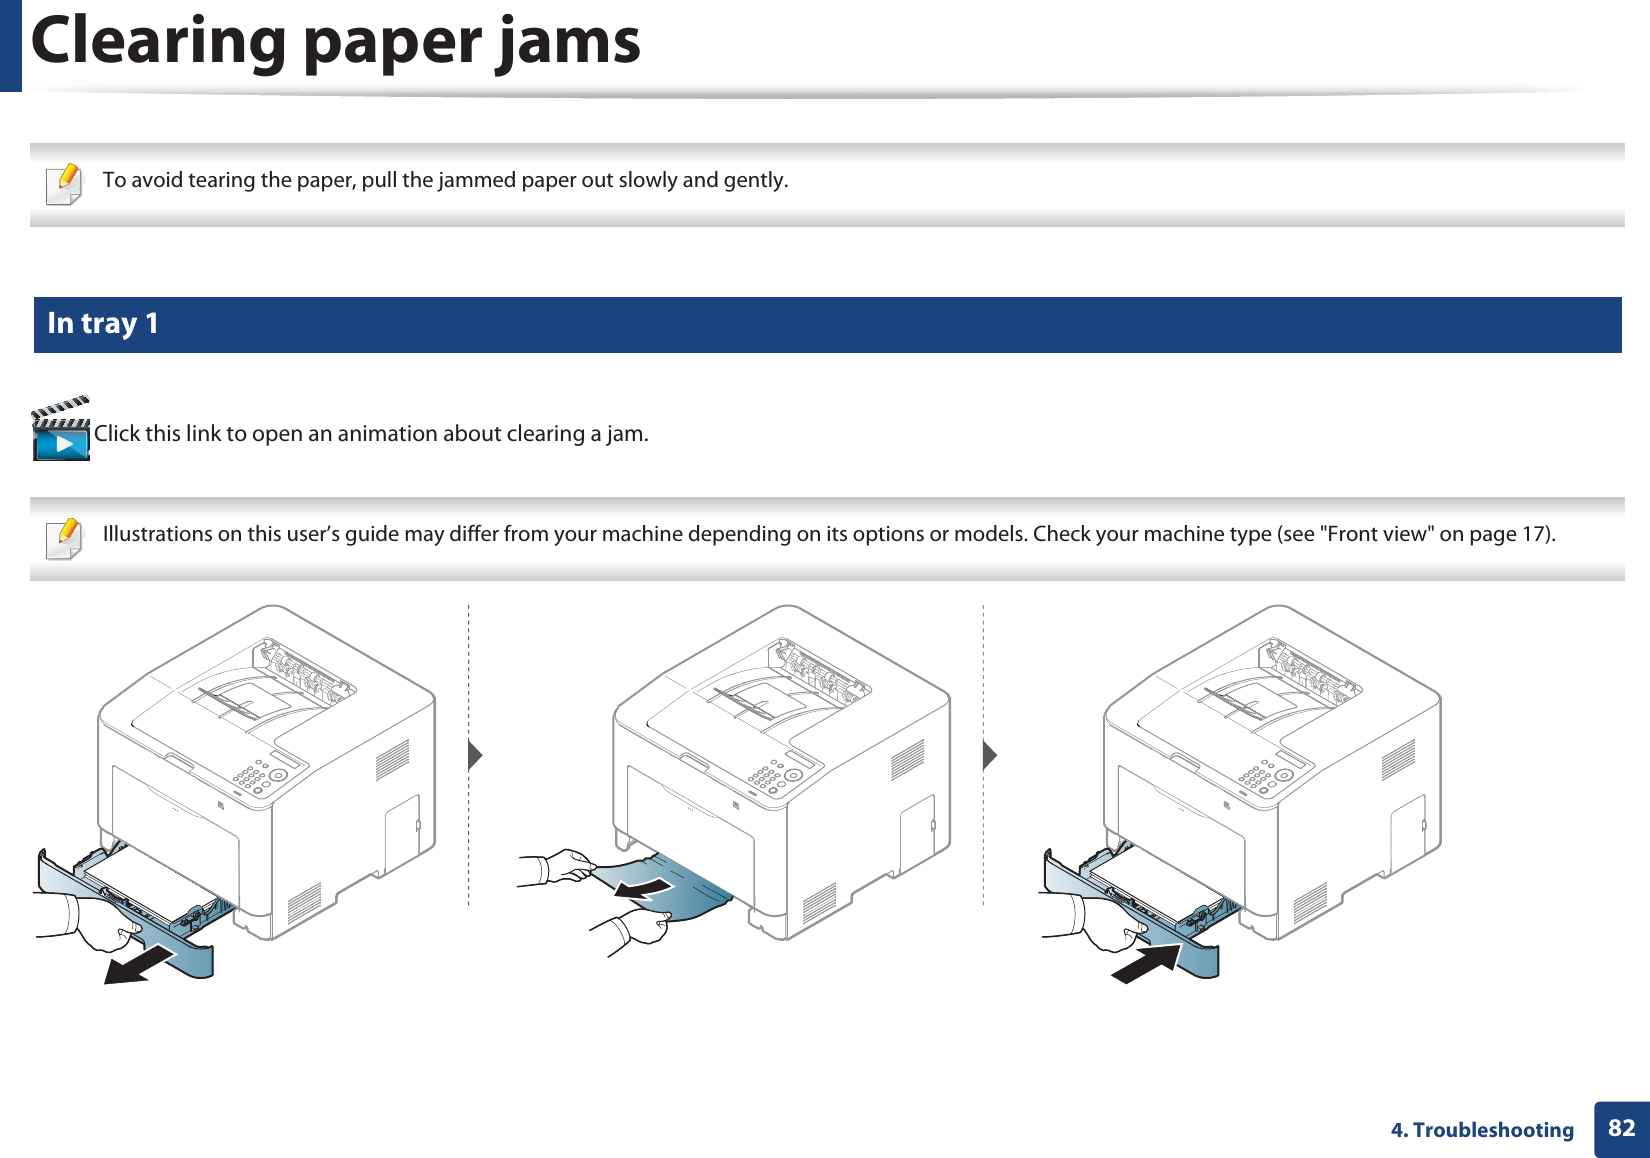 824. TroubleshootingClearing paper jams To avoid tearing the paper, pull the jammed paper out slowly and gently.  1 In tray 1 Click this link to open an animation about clearing a jam. Illustrations on this user’s guide may differ from your machine depending on its options or models. Check your machine type (see &quot;Front view&quot; on page 17). 